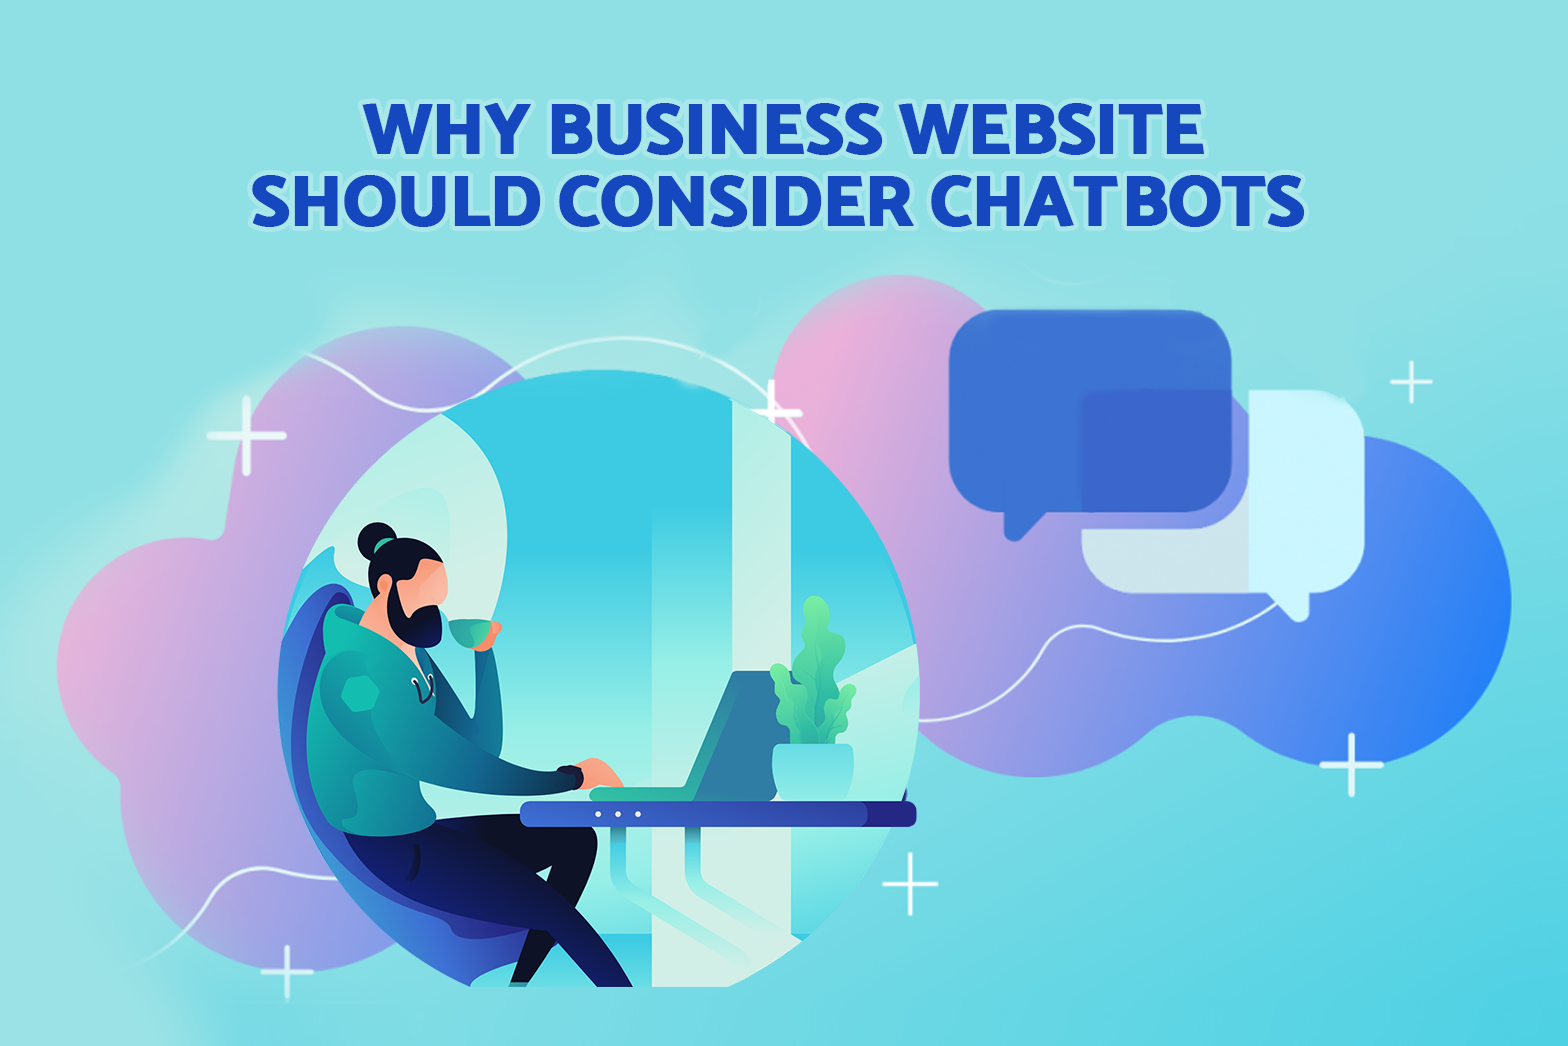 Why Business Website Should Consider Chatbots